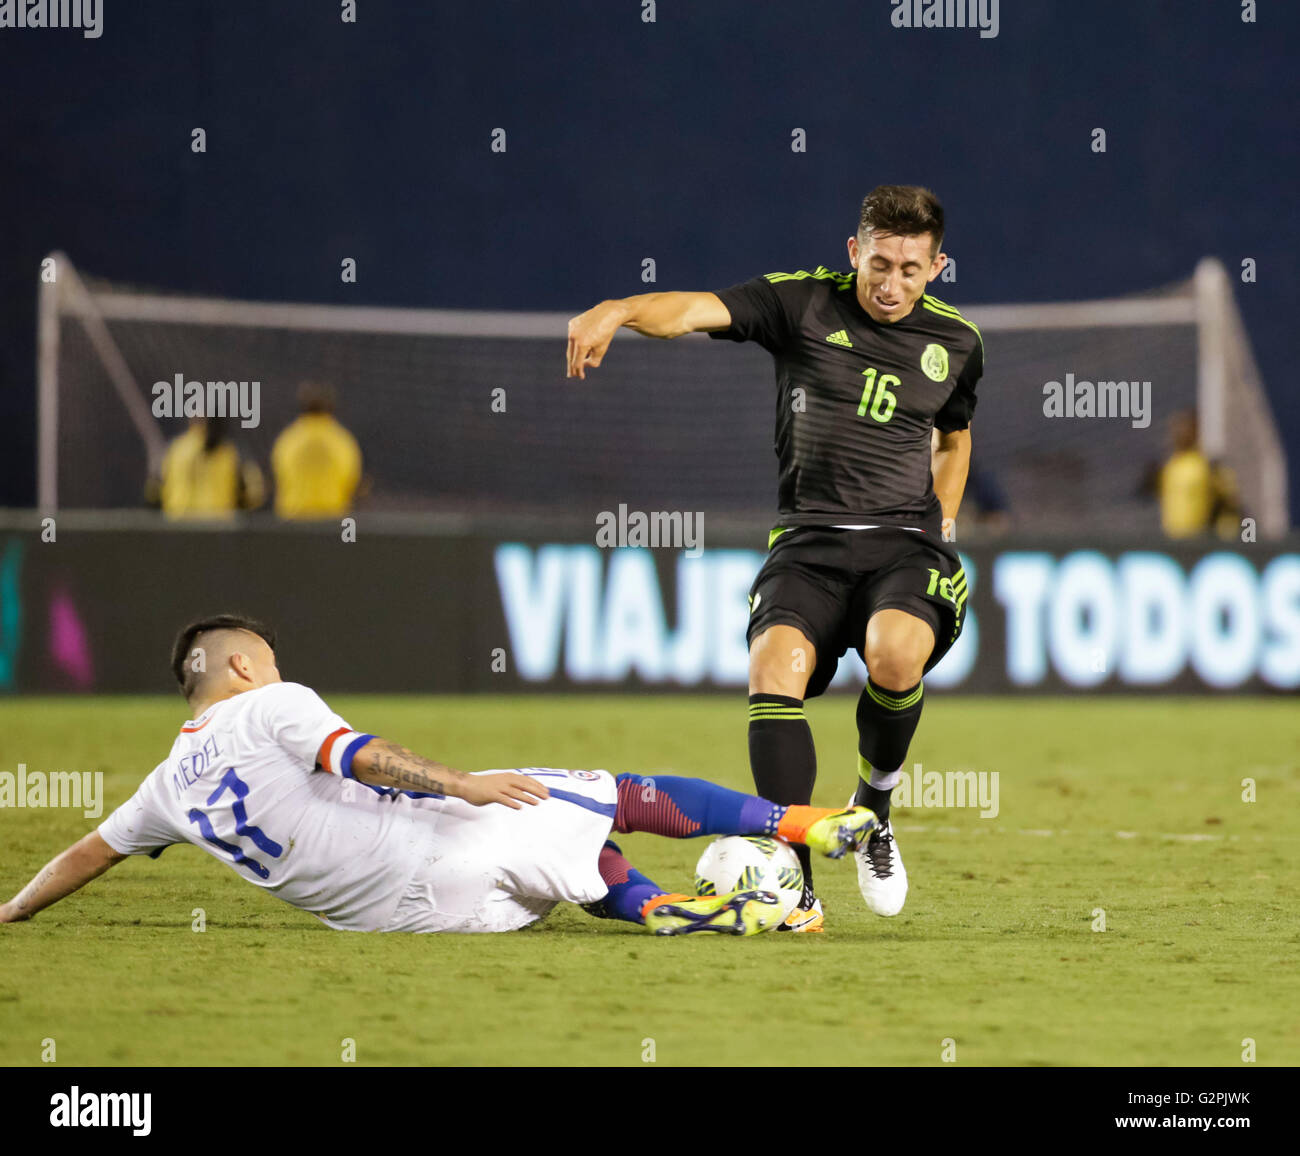 San Diego, California, USA. 01st June, 2016. Chilean #17 Gary Medel takes the ball away from Mexican Midfielder #16 Hector Herrera during an international soccer match between Mexico and Chile at Qualcomm Stadium in San Diego, California. Mexico defeats Chile 1-0. Justin Cooper/CSM/Alamy Live News Stock Photo